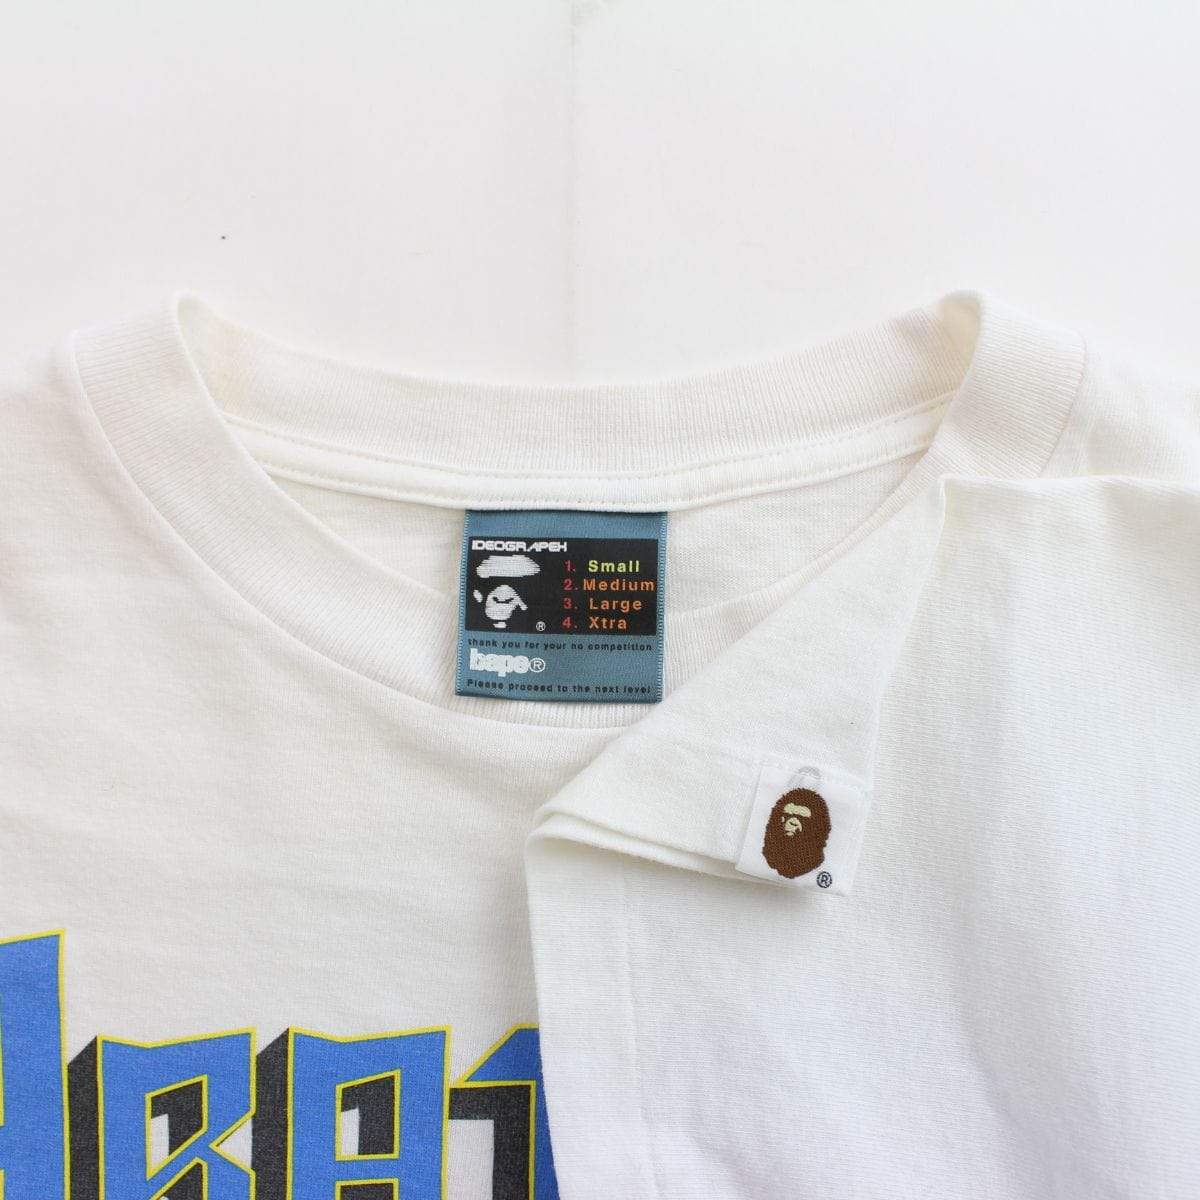 bape dice blue text tee white - SaruGeneral